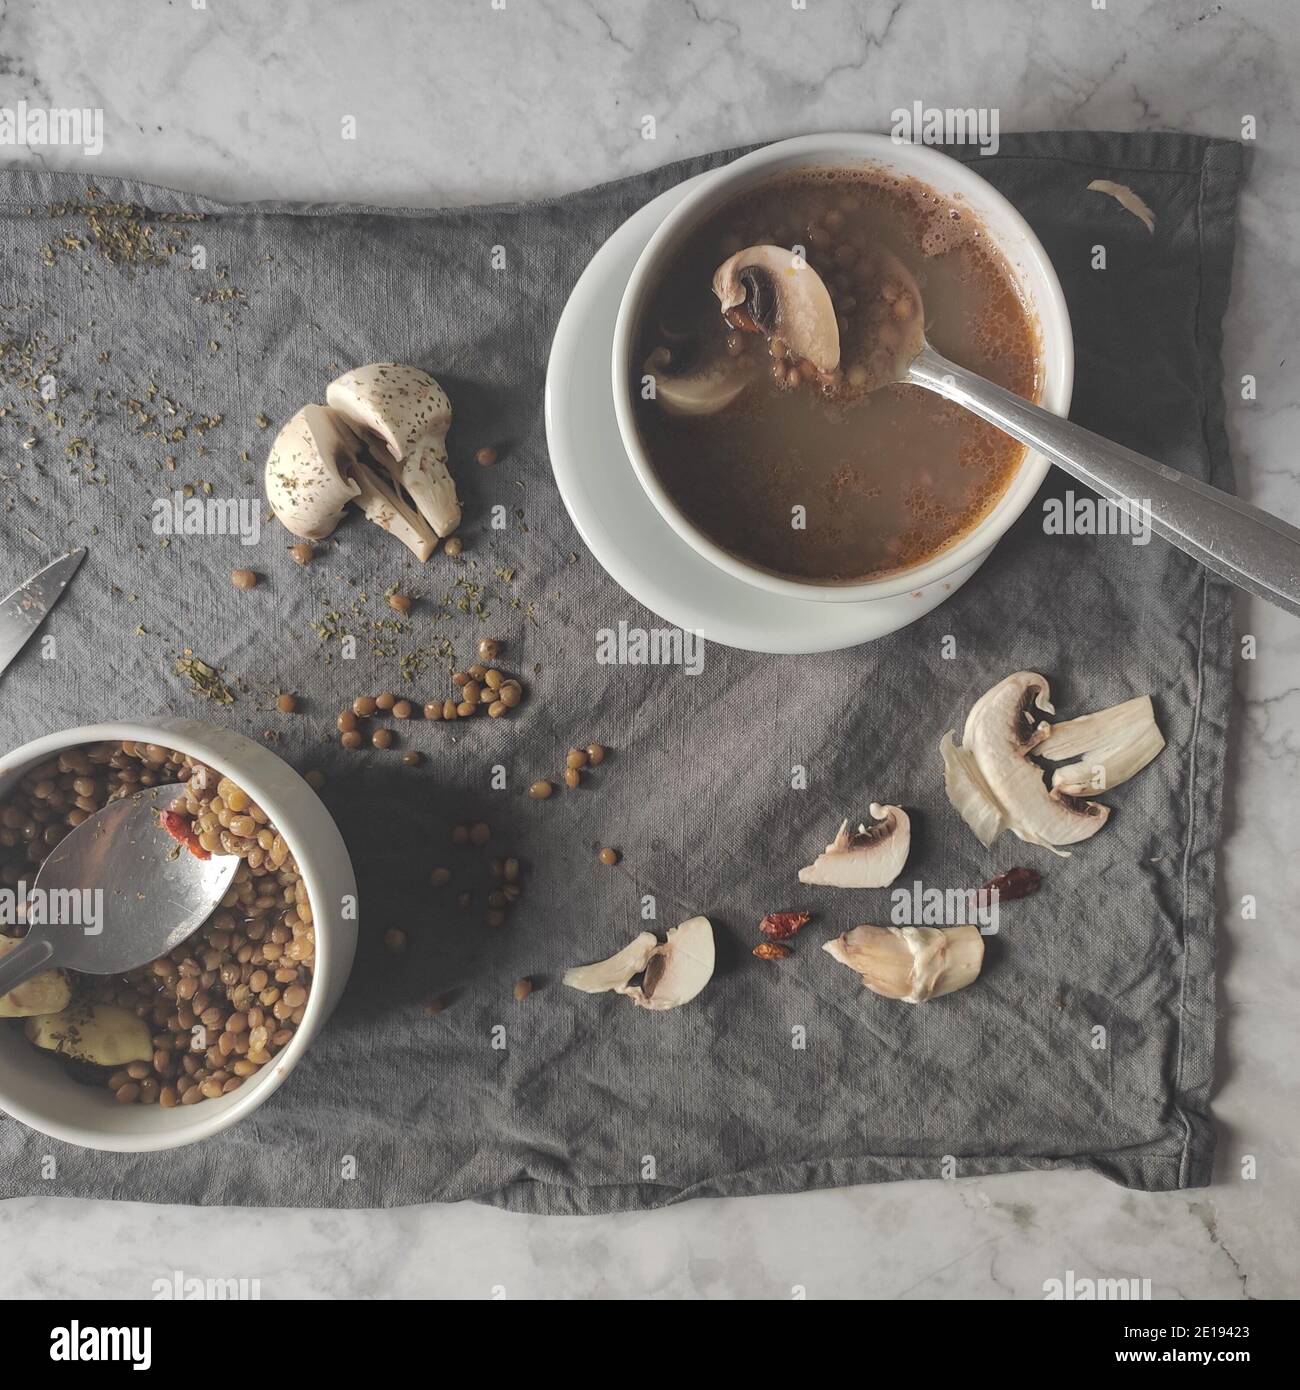 Lentils and mushroom soup Stock Photo